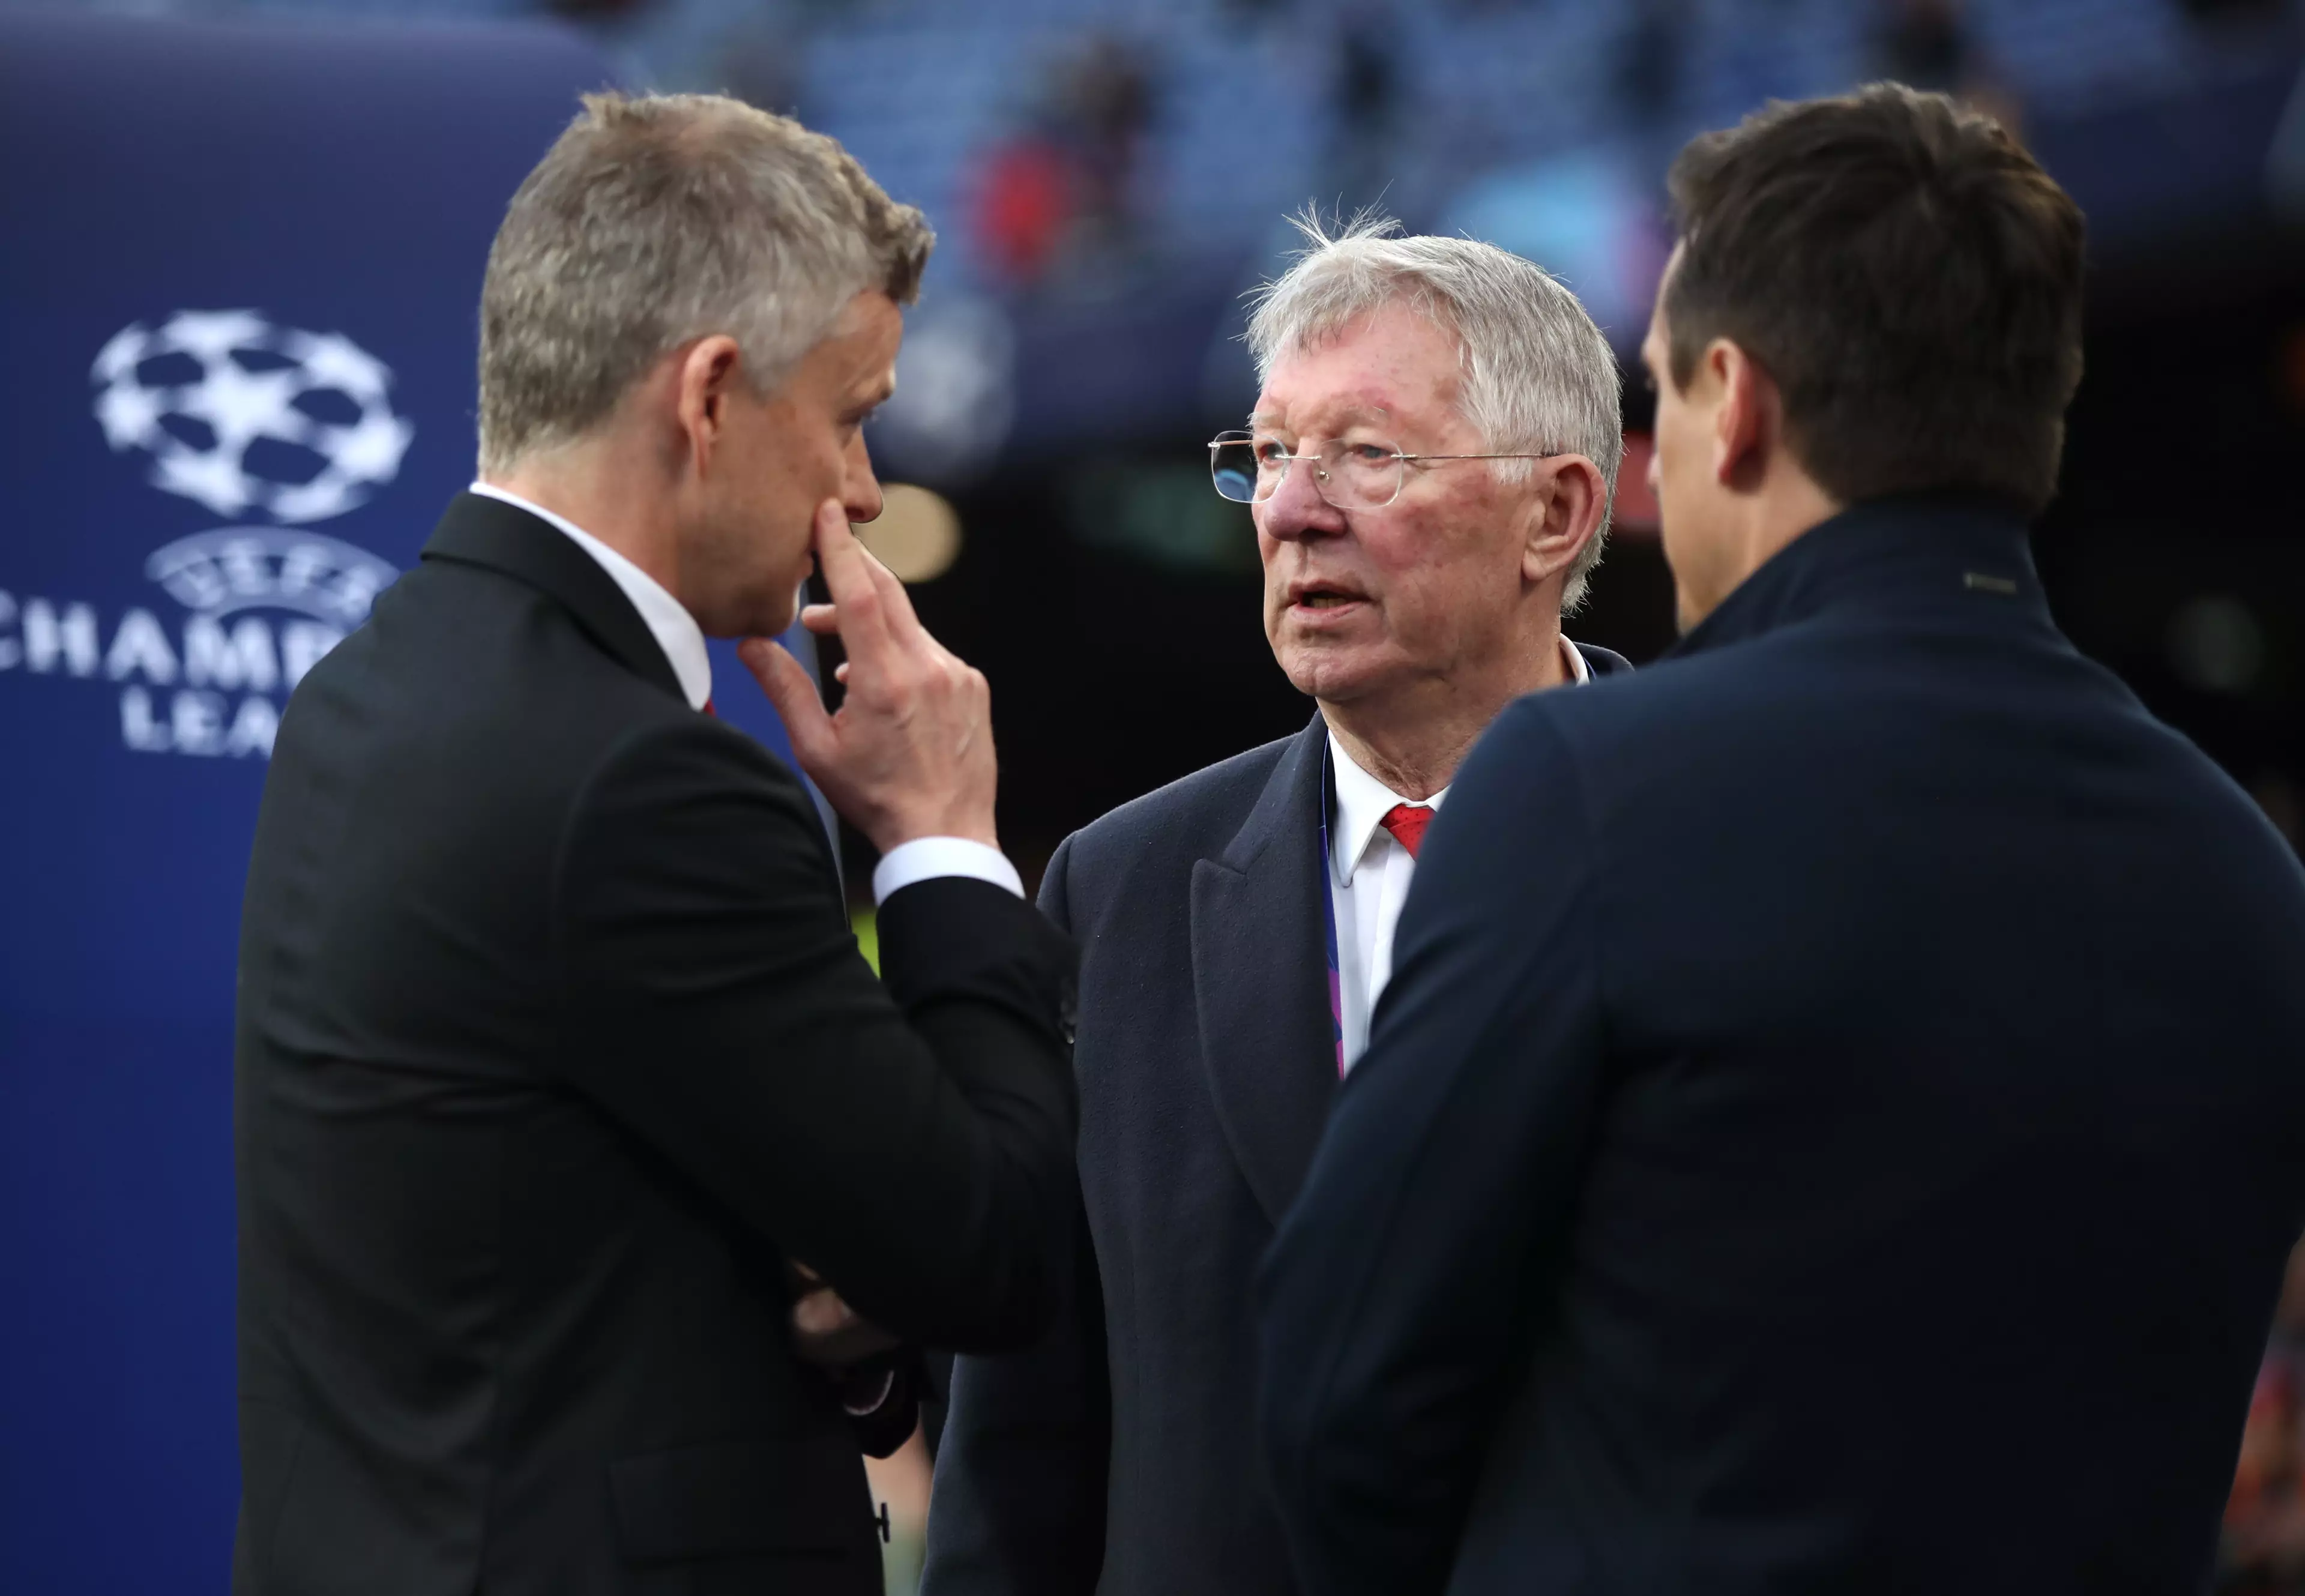 Ferguson talking to former players Ole Gunnar Solskjaer and Gary Neville. Image: PA Images